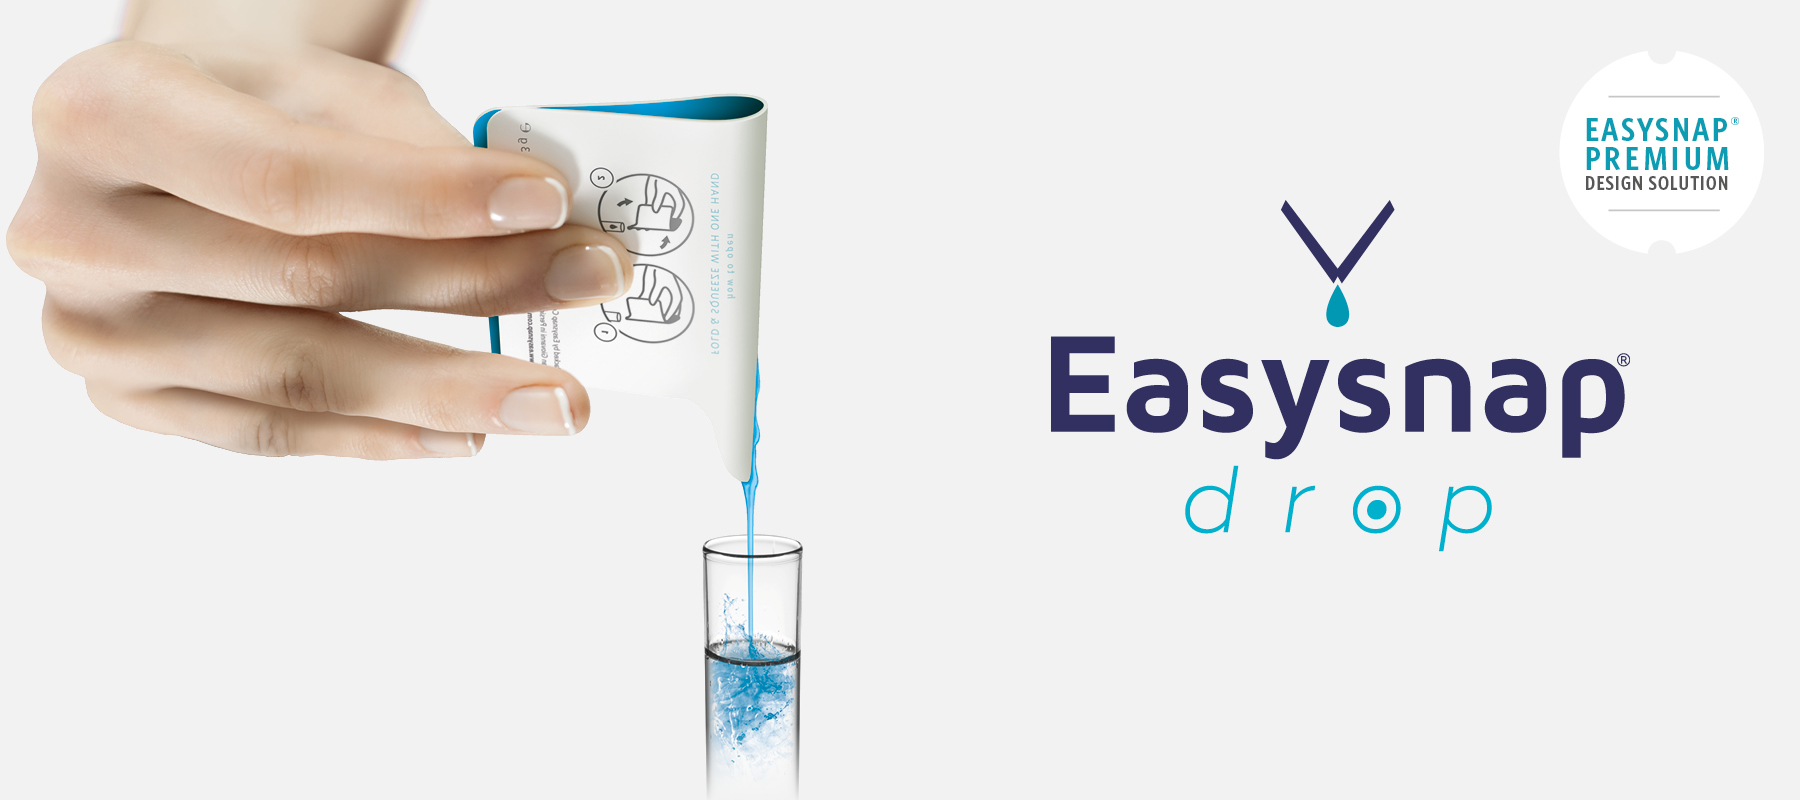 Easysnap Drop • One Hand Technology with Drop Dispenser